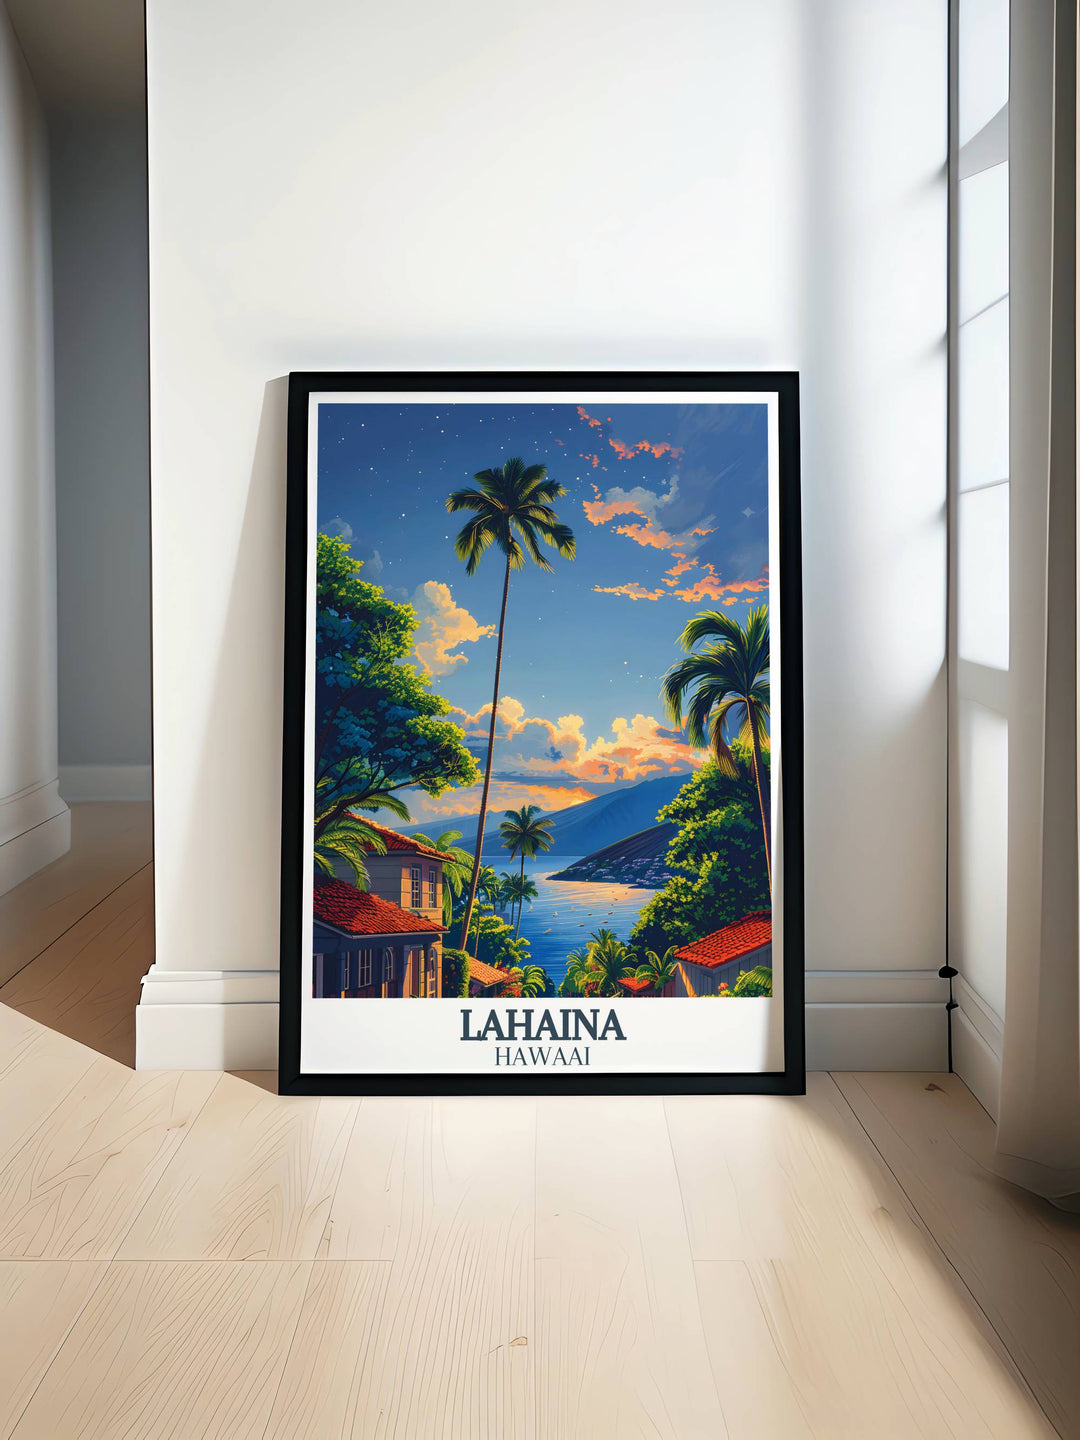 Detailed illustration of Front Street in Lahaina showcasing bustling activity and tropical setting perfect for enhancing any room decor.